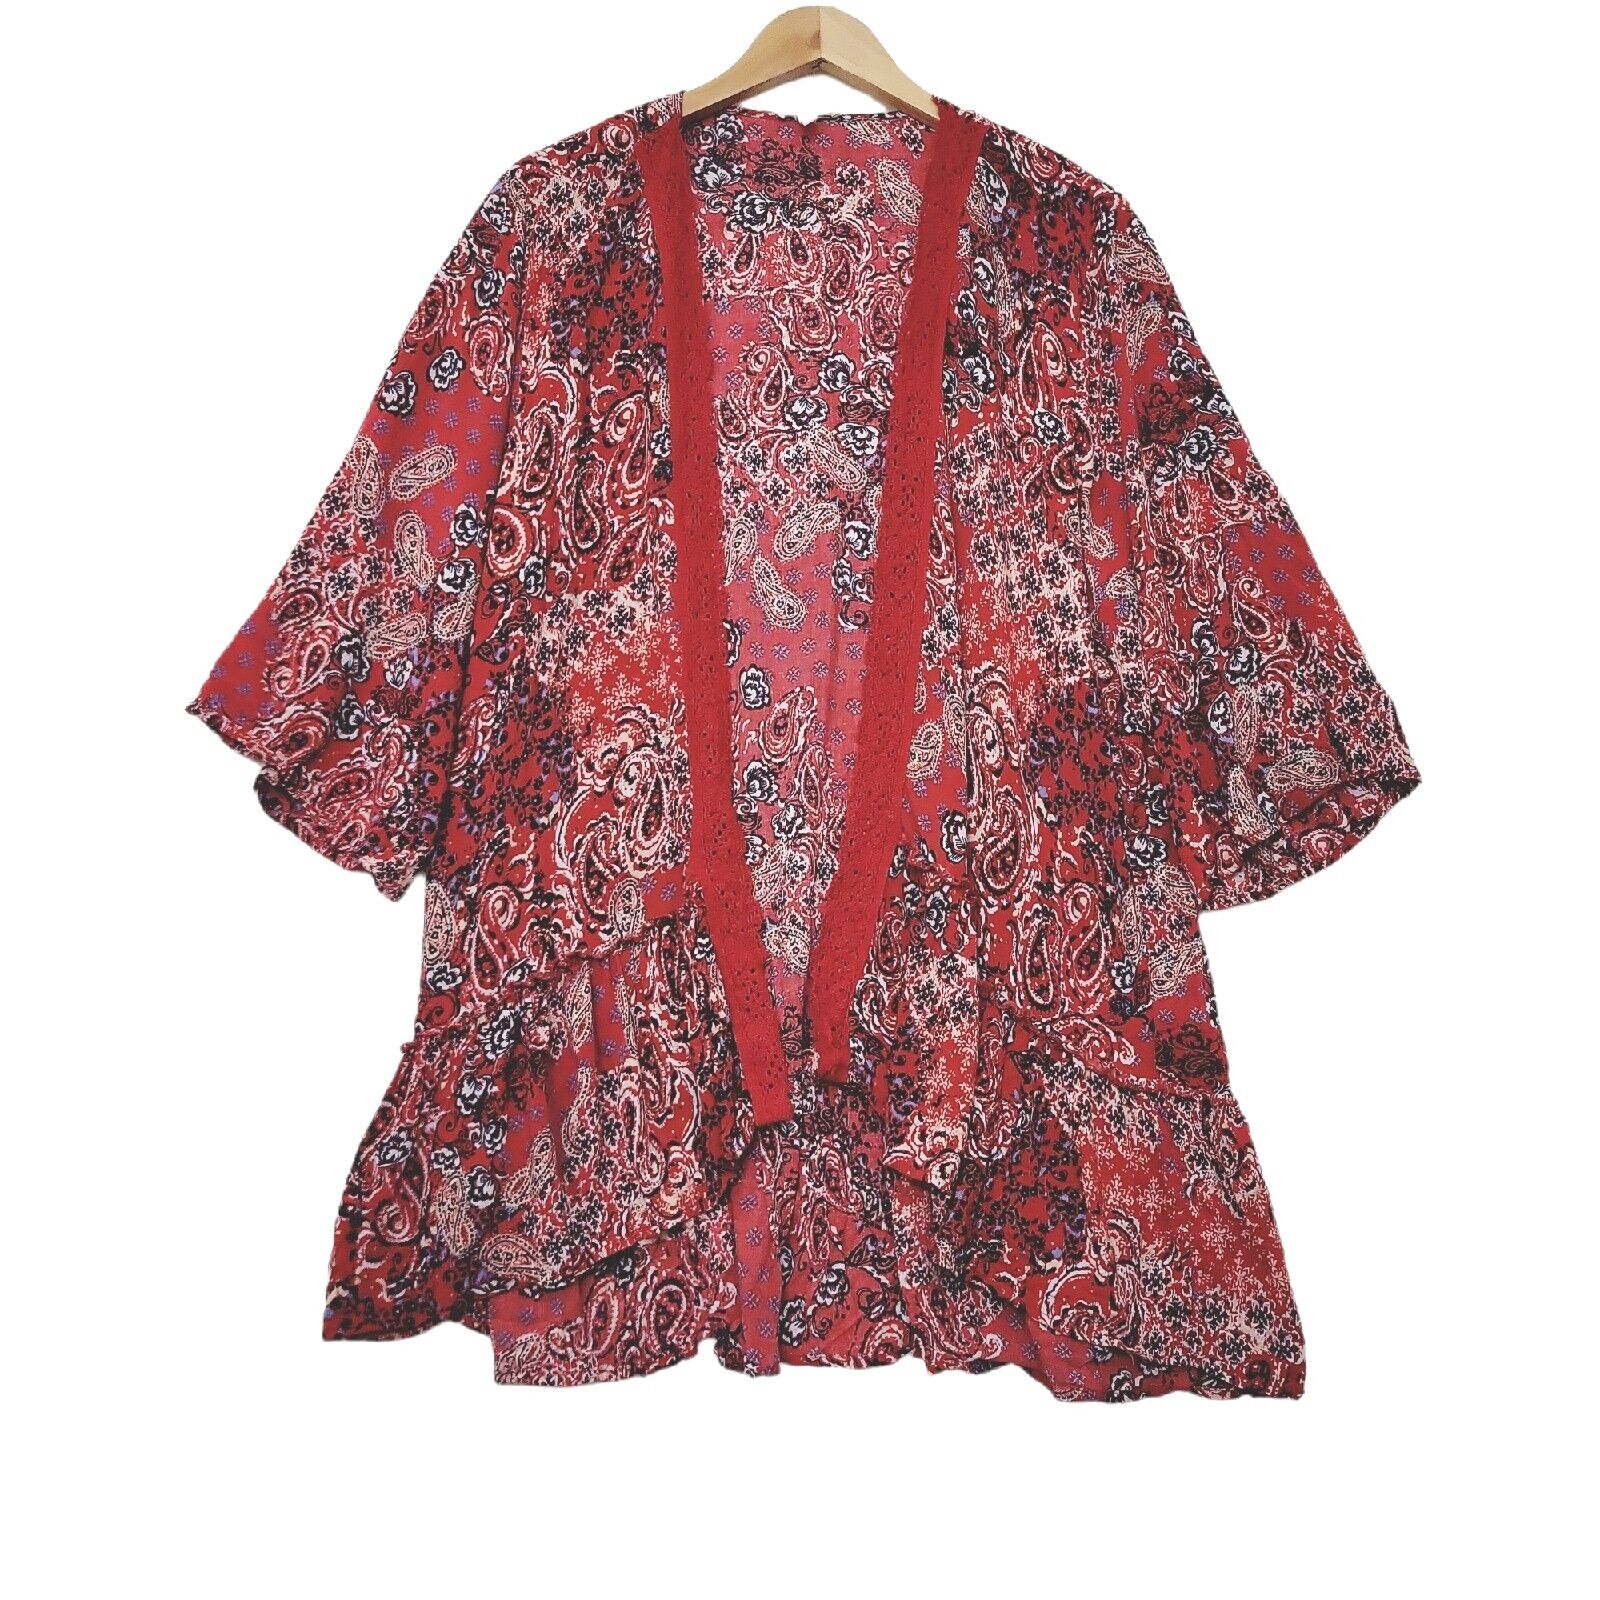 Maurices Womens Plus Size 1X Kimono Open Front Red Paisley 3/4 Sleeve Lace Trim